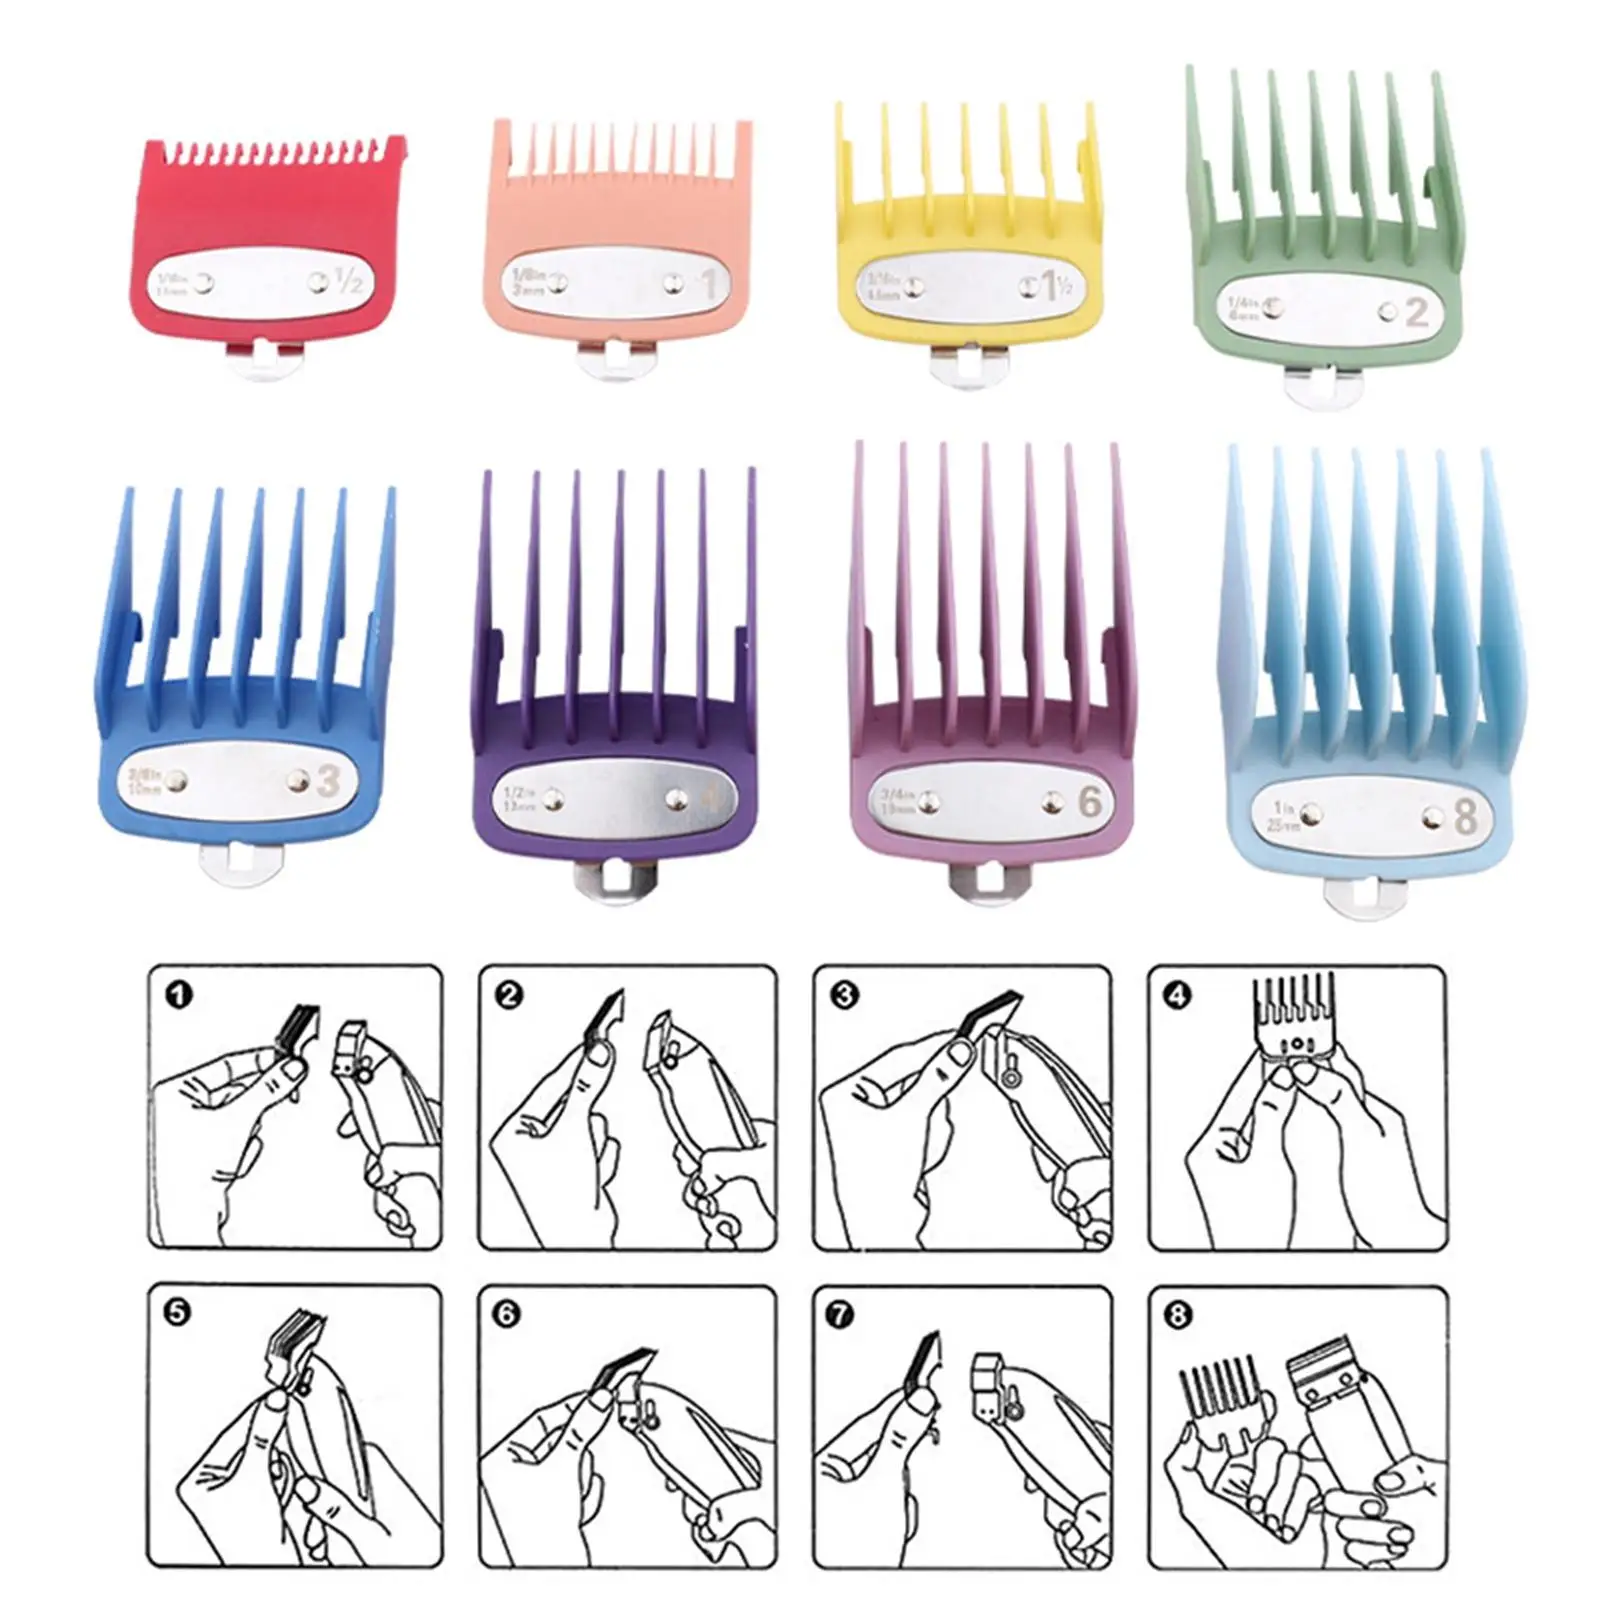 

8x Hair / Attachment Professional from 1/16 inch to with Metal Clip/ Guide Combs for /